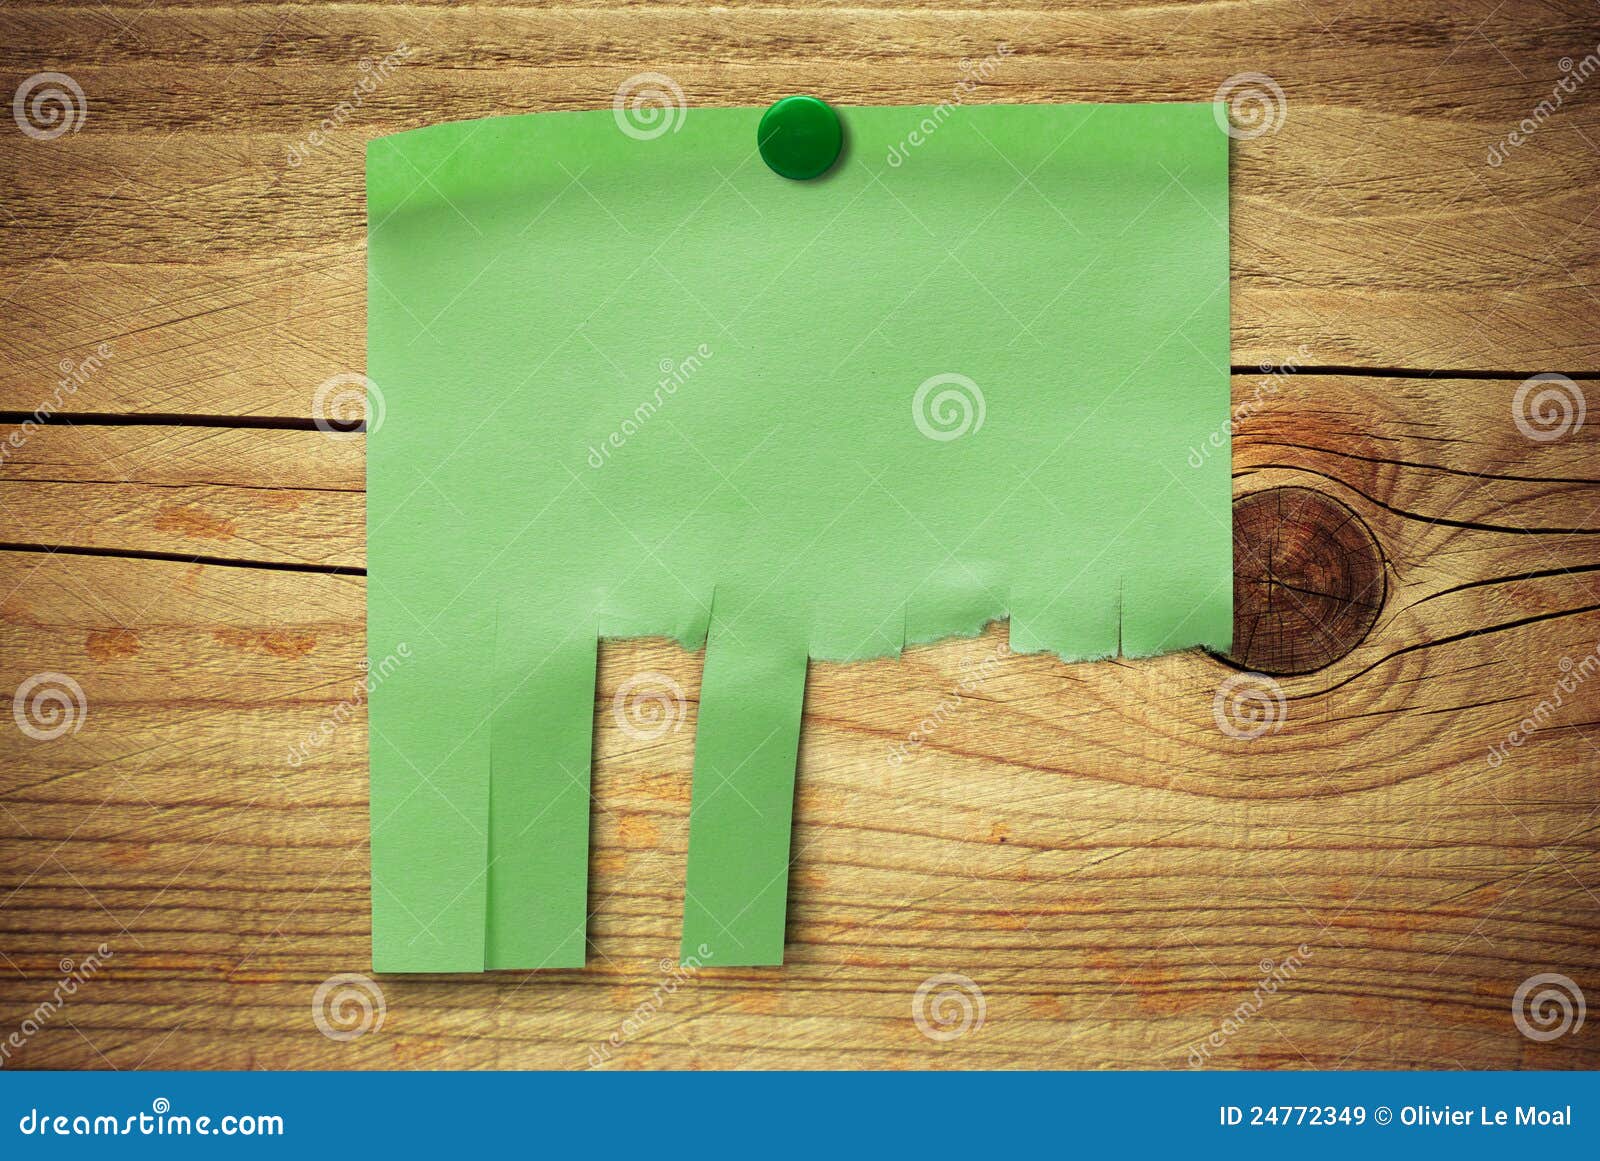 Blank green note with tearable strips over wooden background, can be customized to enter some text, address and contact details